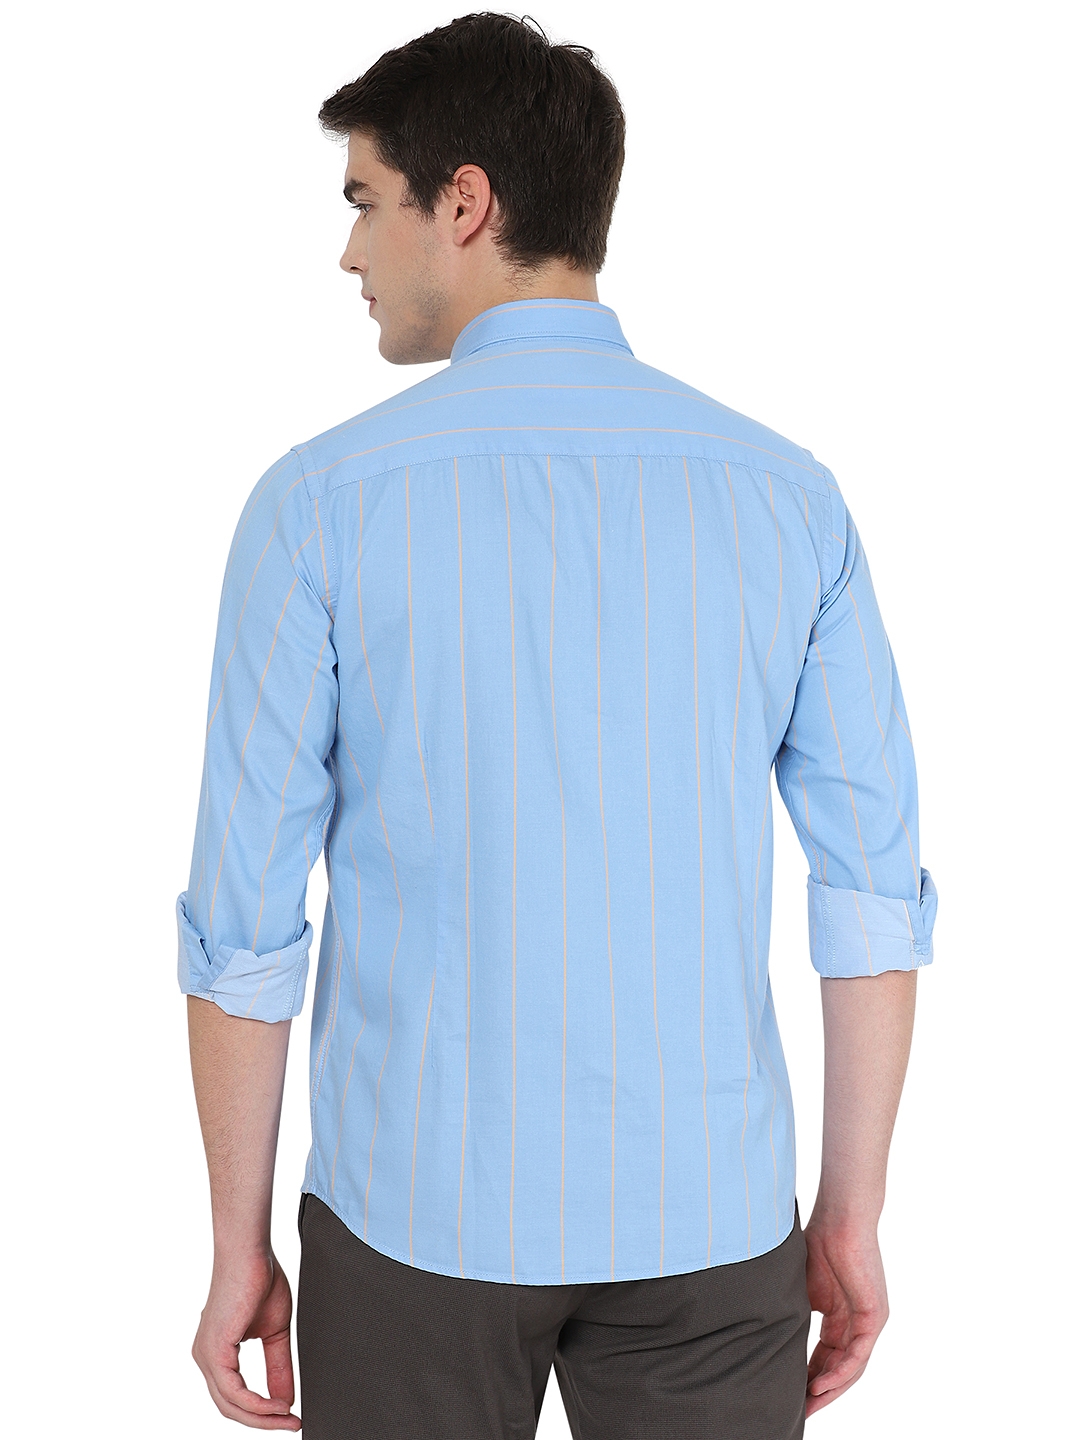 Greenfibre | Light Blue Striped Slim Fit Casual Shirt | Greenfibre 2